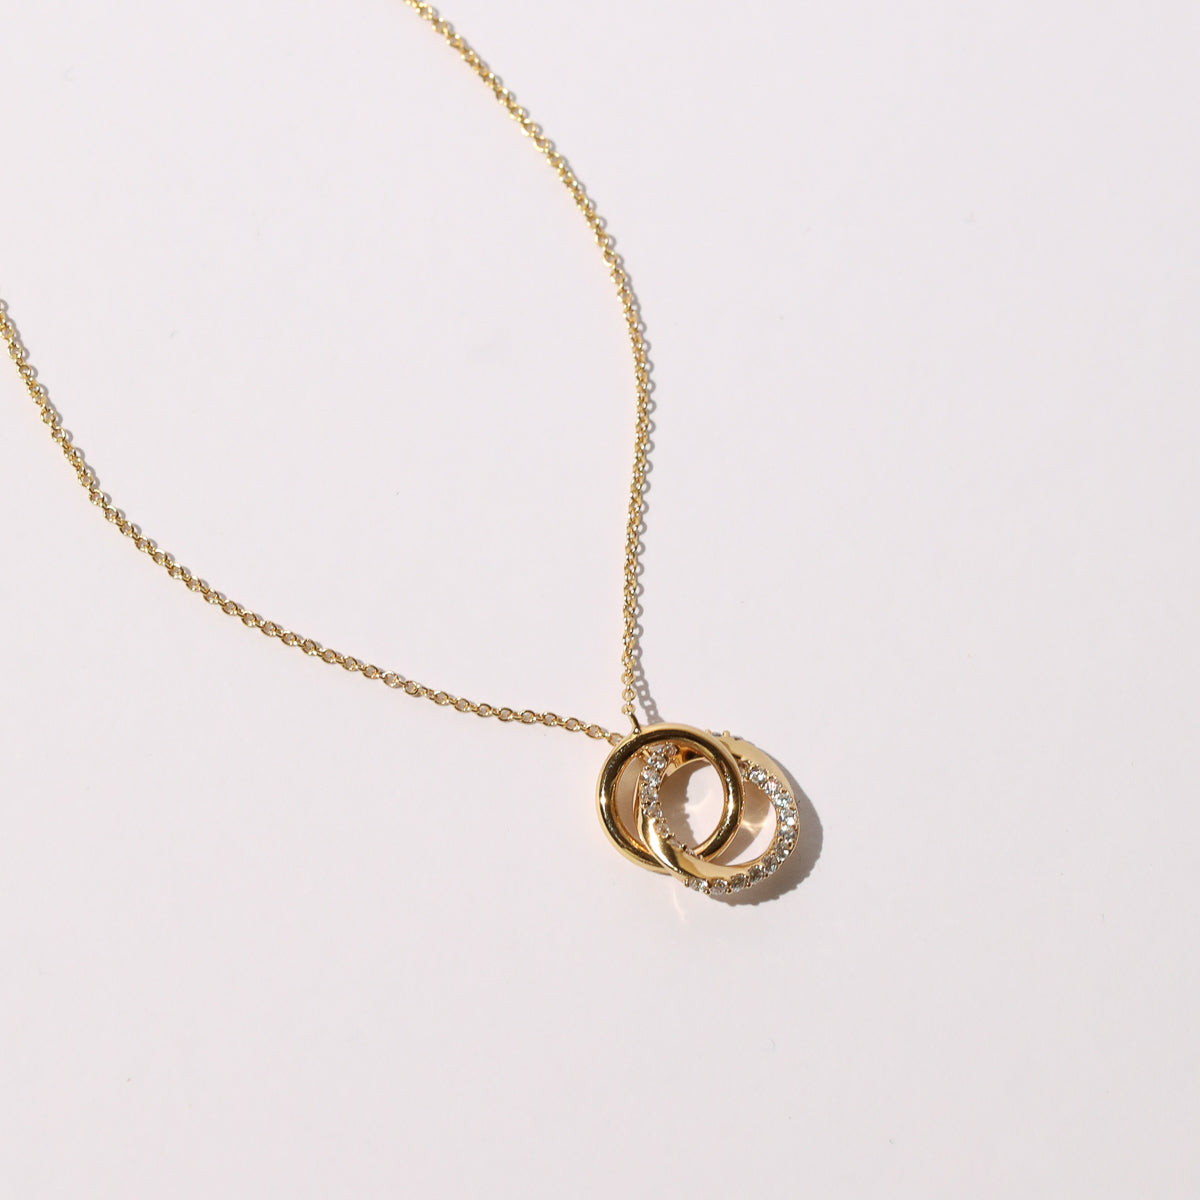 Orbit Crystal Chain Necklace in Gold flat lay